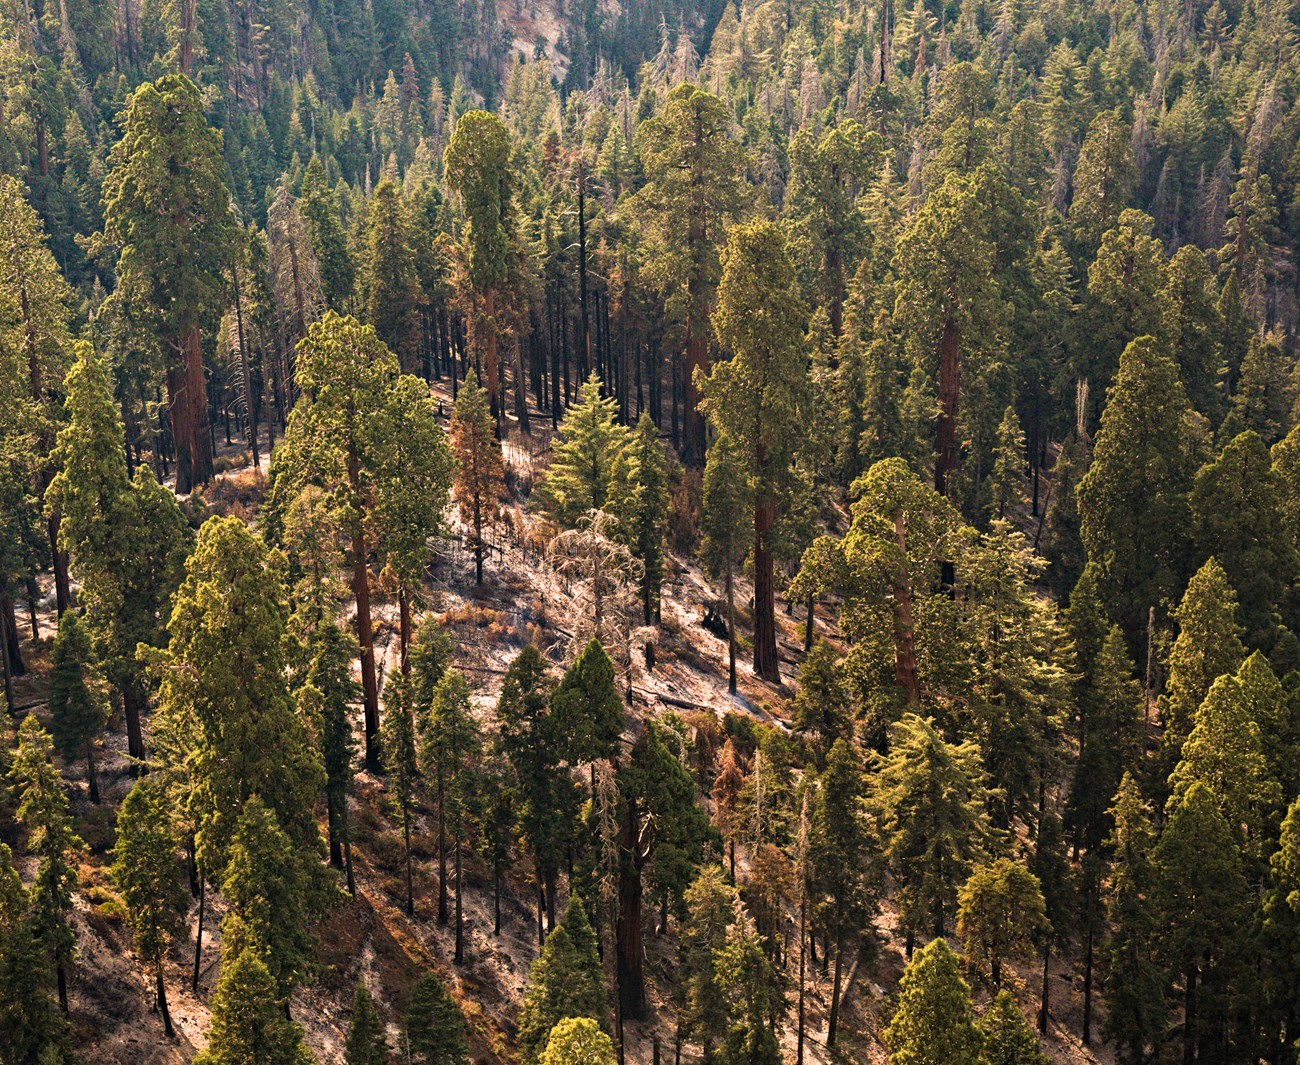 Looking down on still green giant sequoias and a few scattered small trees with needles scorched brown by fire.